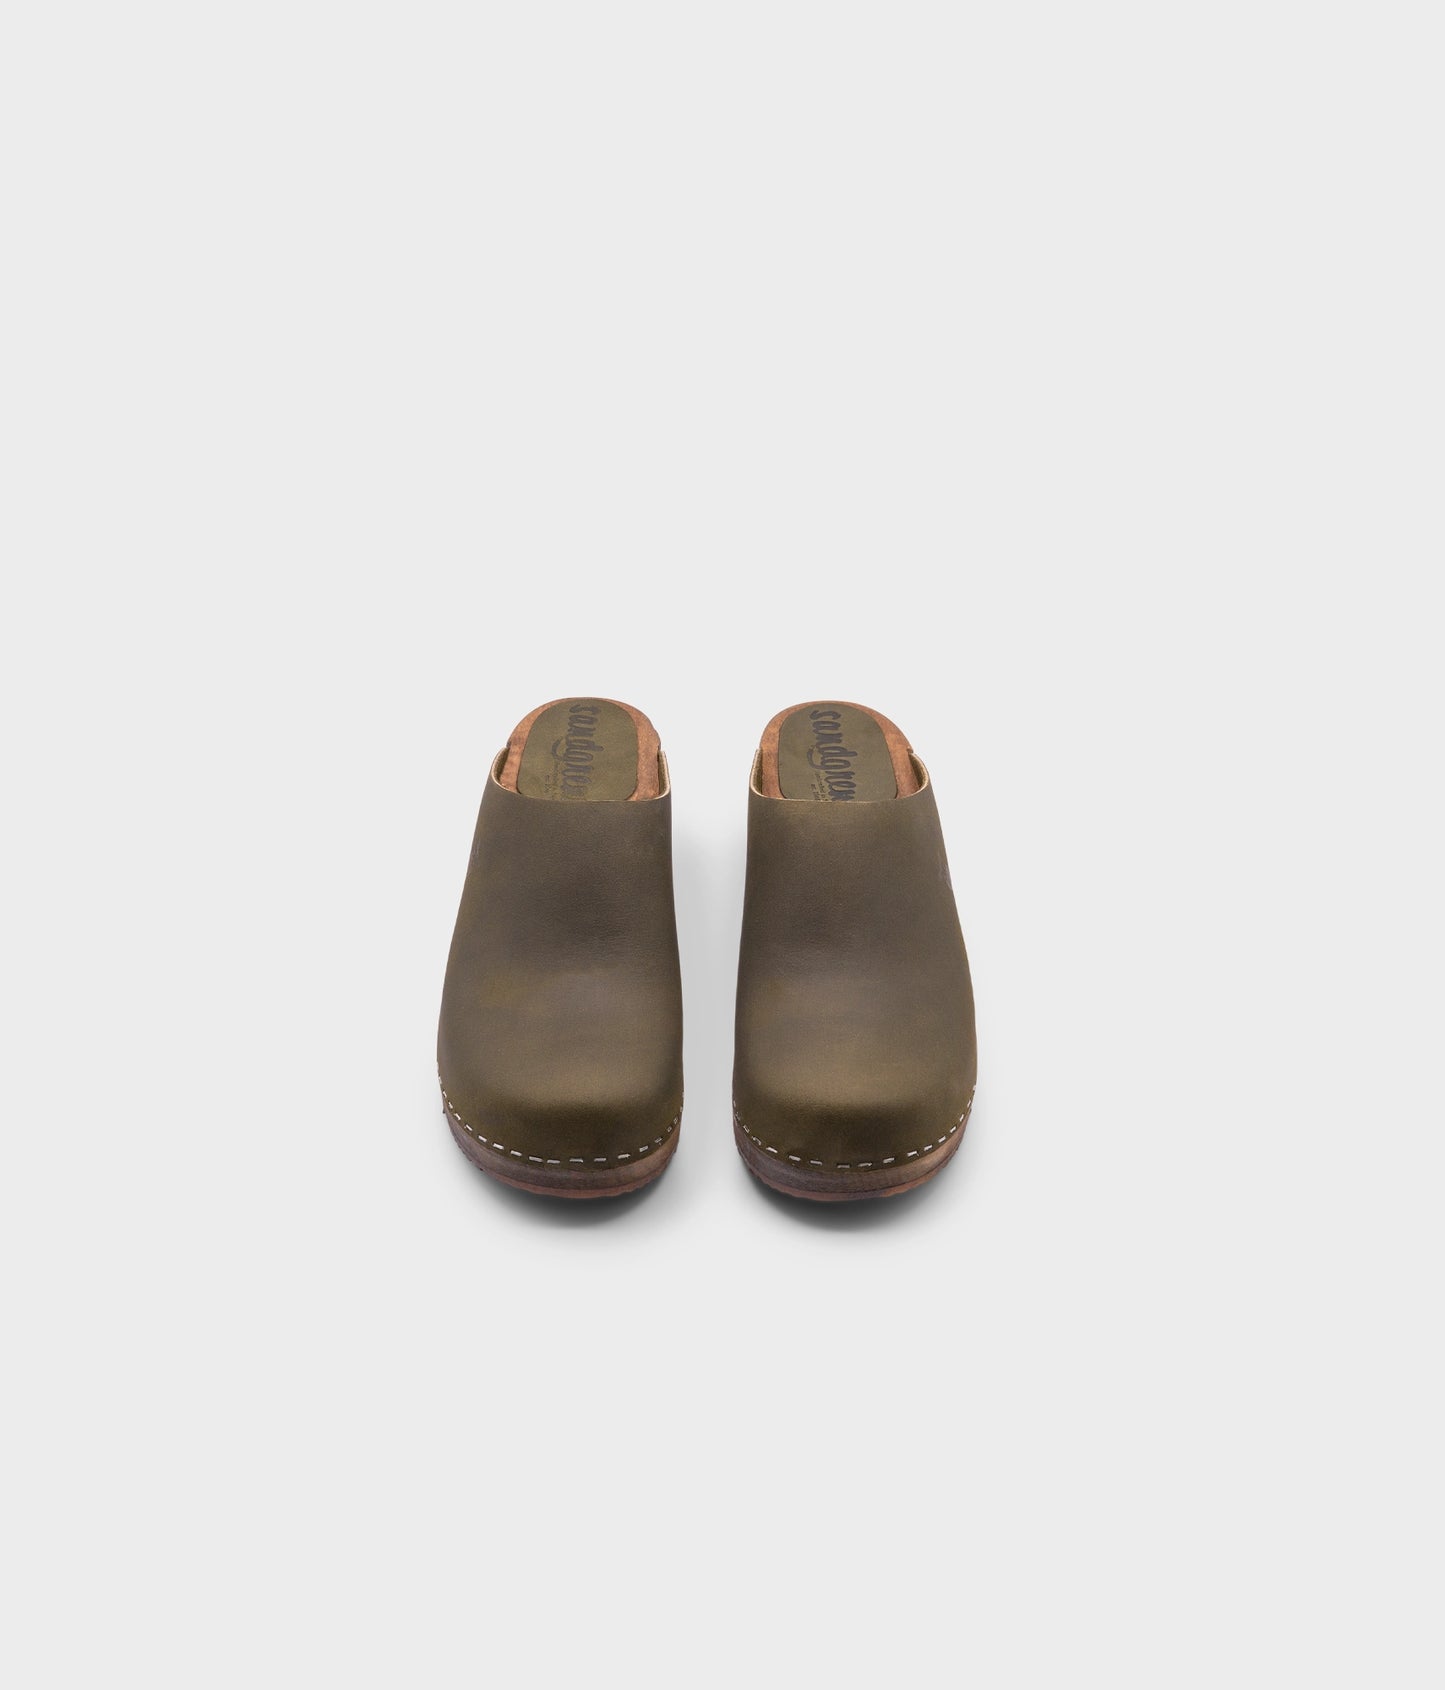 low heeled minimalistic clog mules in olive nubuck leather stapled on a dark wooden base